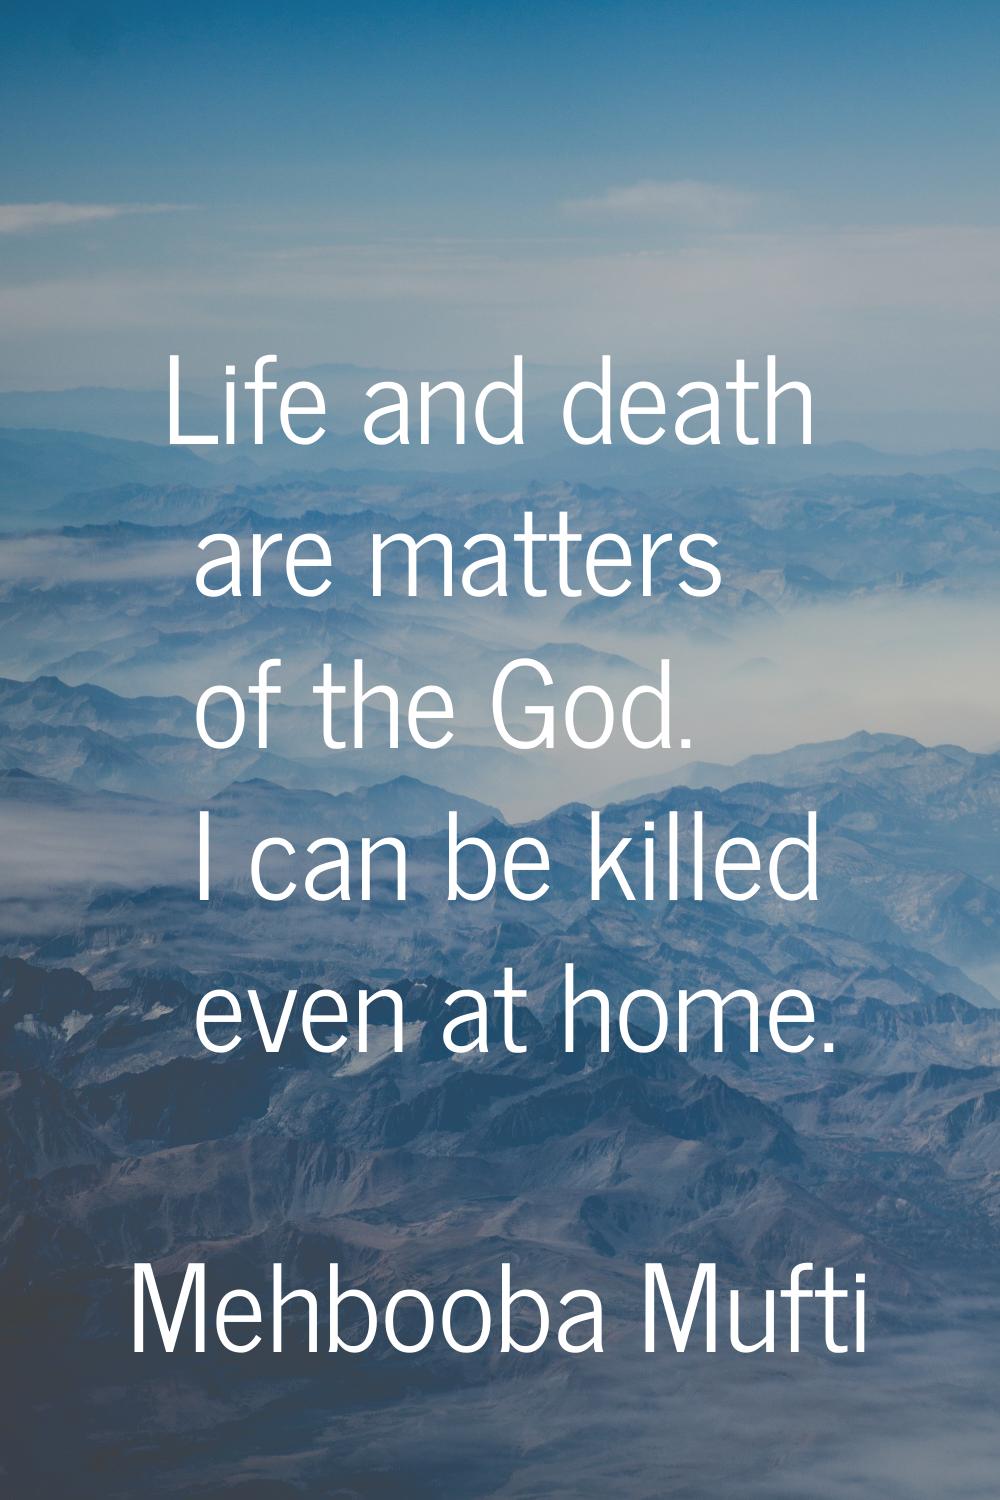 Life and death are matters of the God. I can be killed even at home.